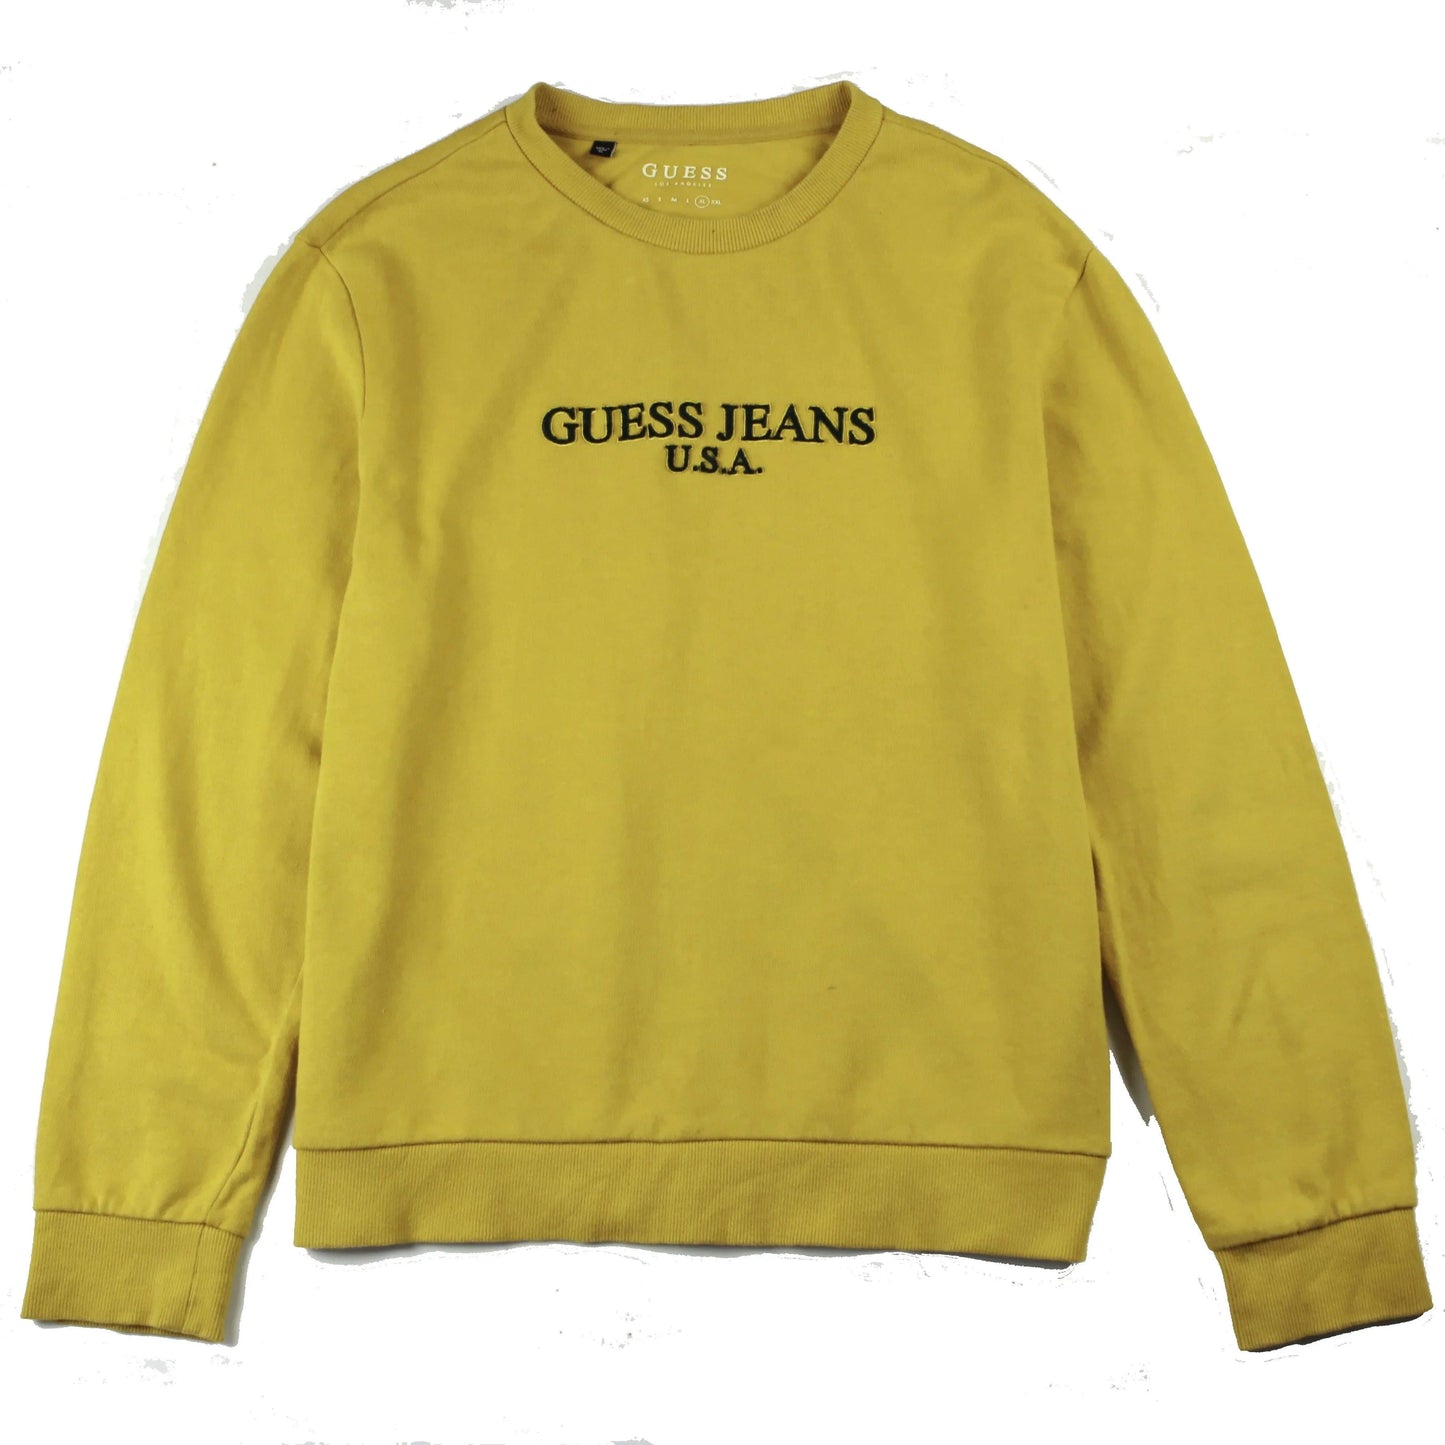 GUESS JEANS CLASSIC CREW SWEAT (L) - Known Source